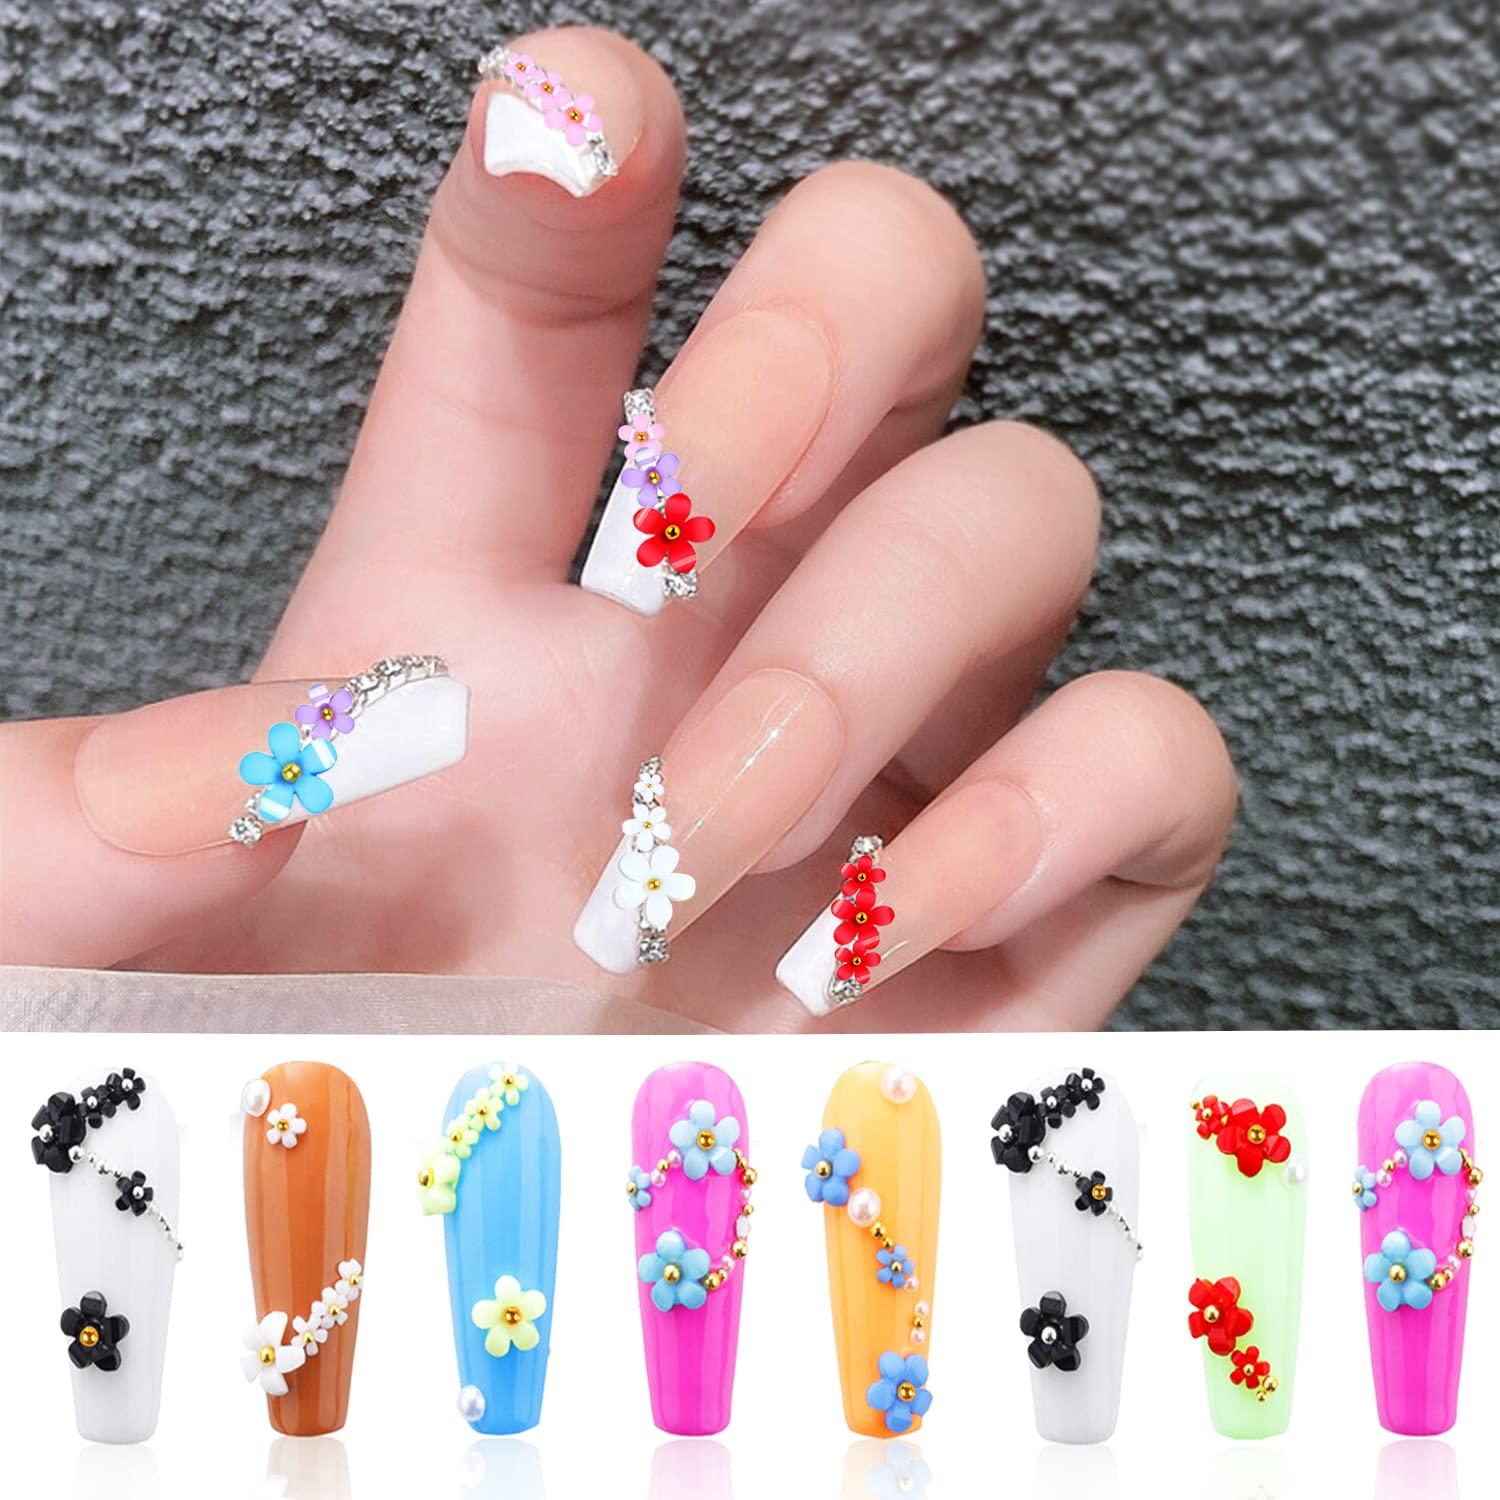 Alien 3D Nail Transfer Sliders Space Color Glitter Sticker For Nails Art  Decoration, Adhesive Manicure Drop Delivery Available From Babyskirt, $0.49  | DHgate.Com